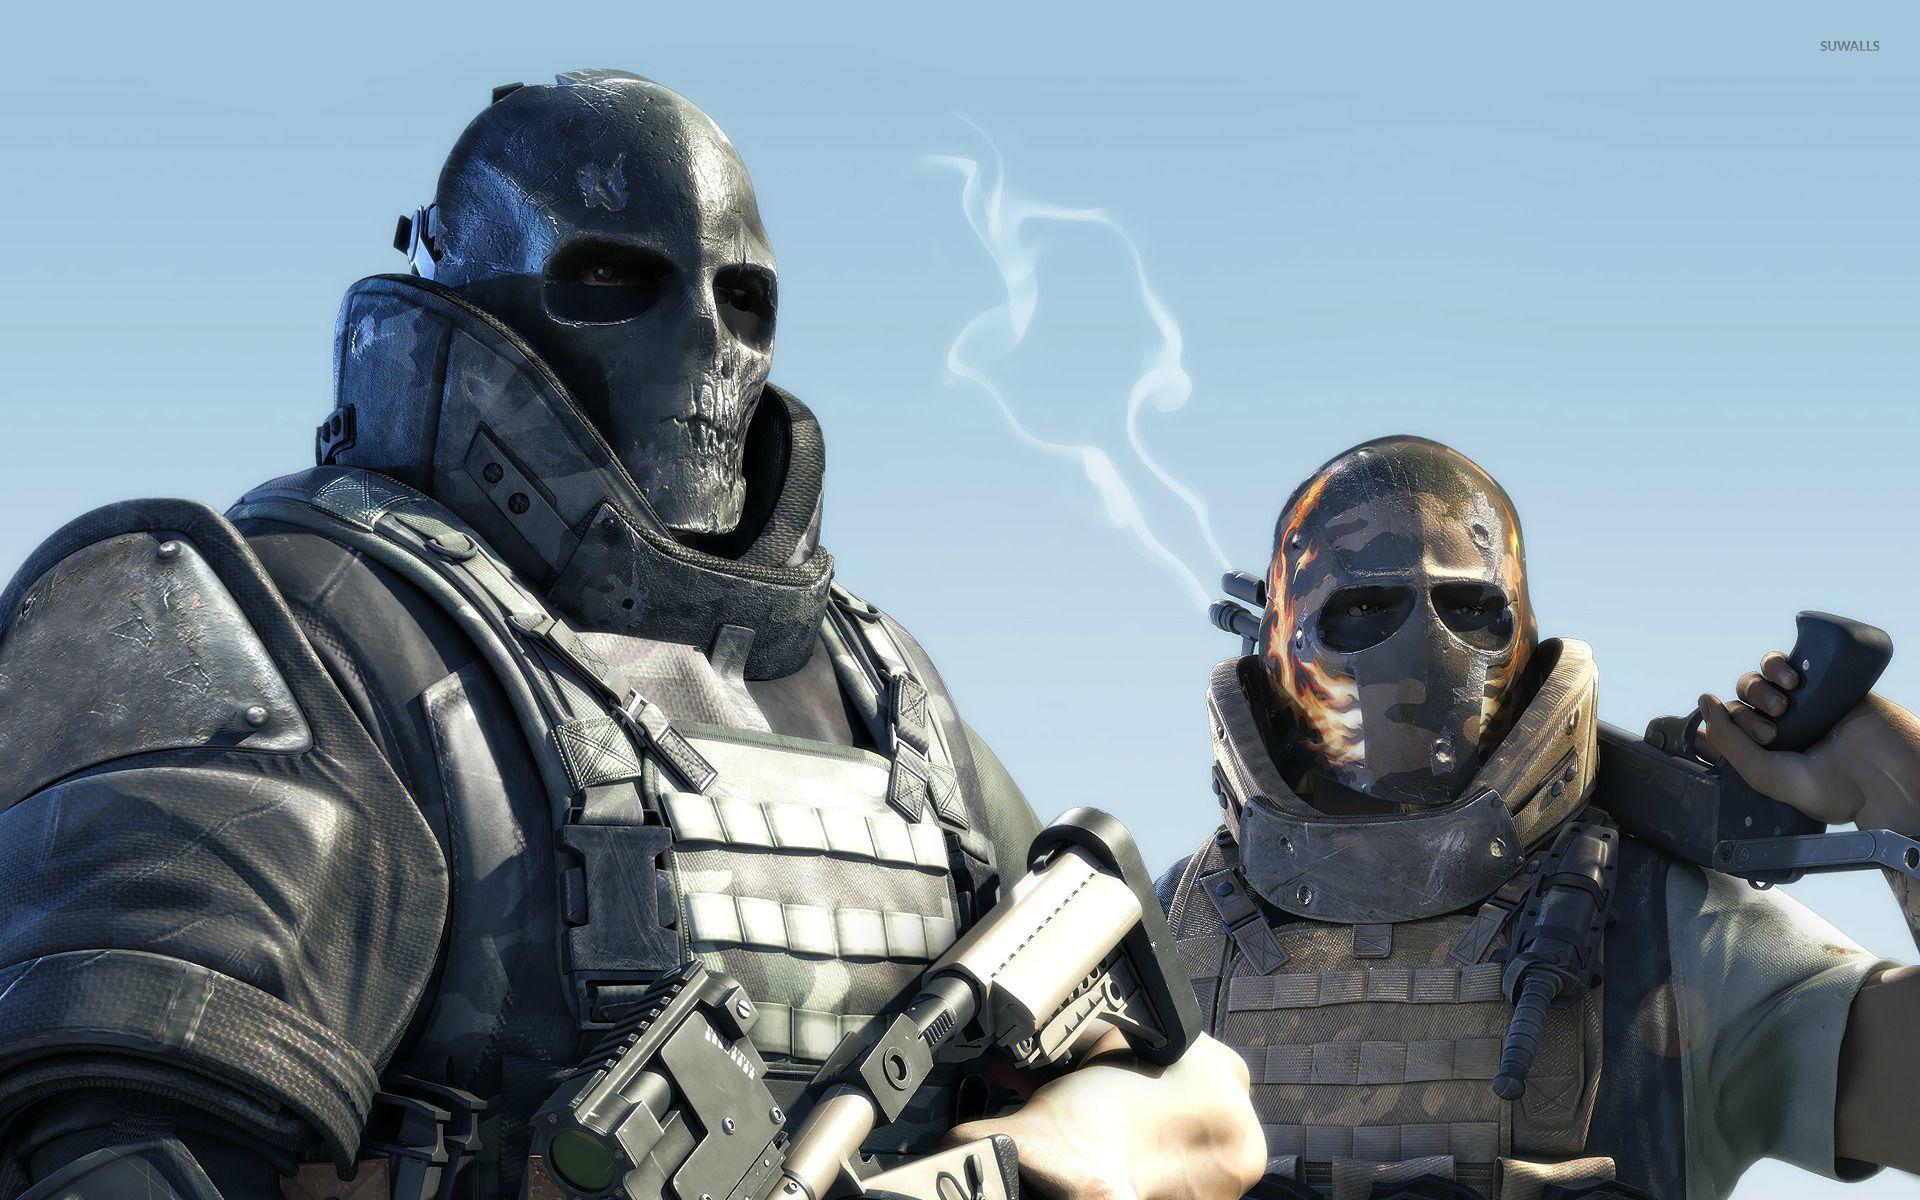 Army of Two: The Devil's Cartel [5] wallpaper wallpaper